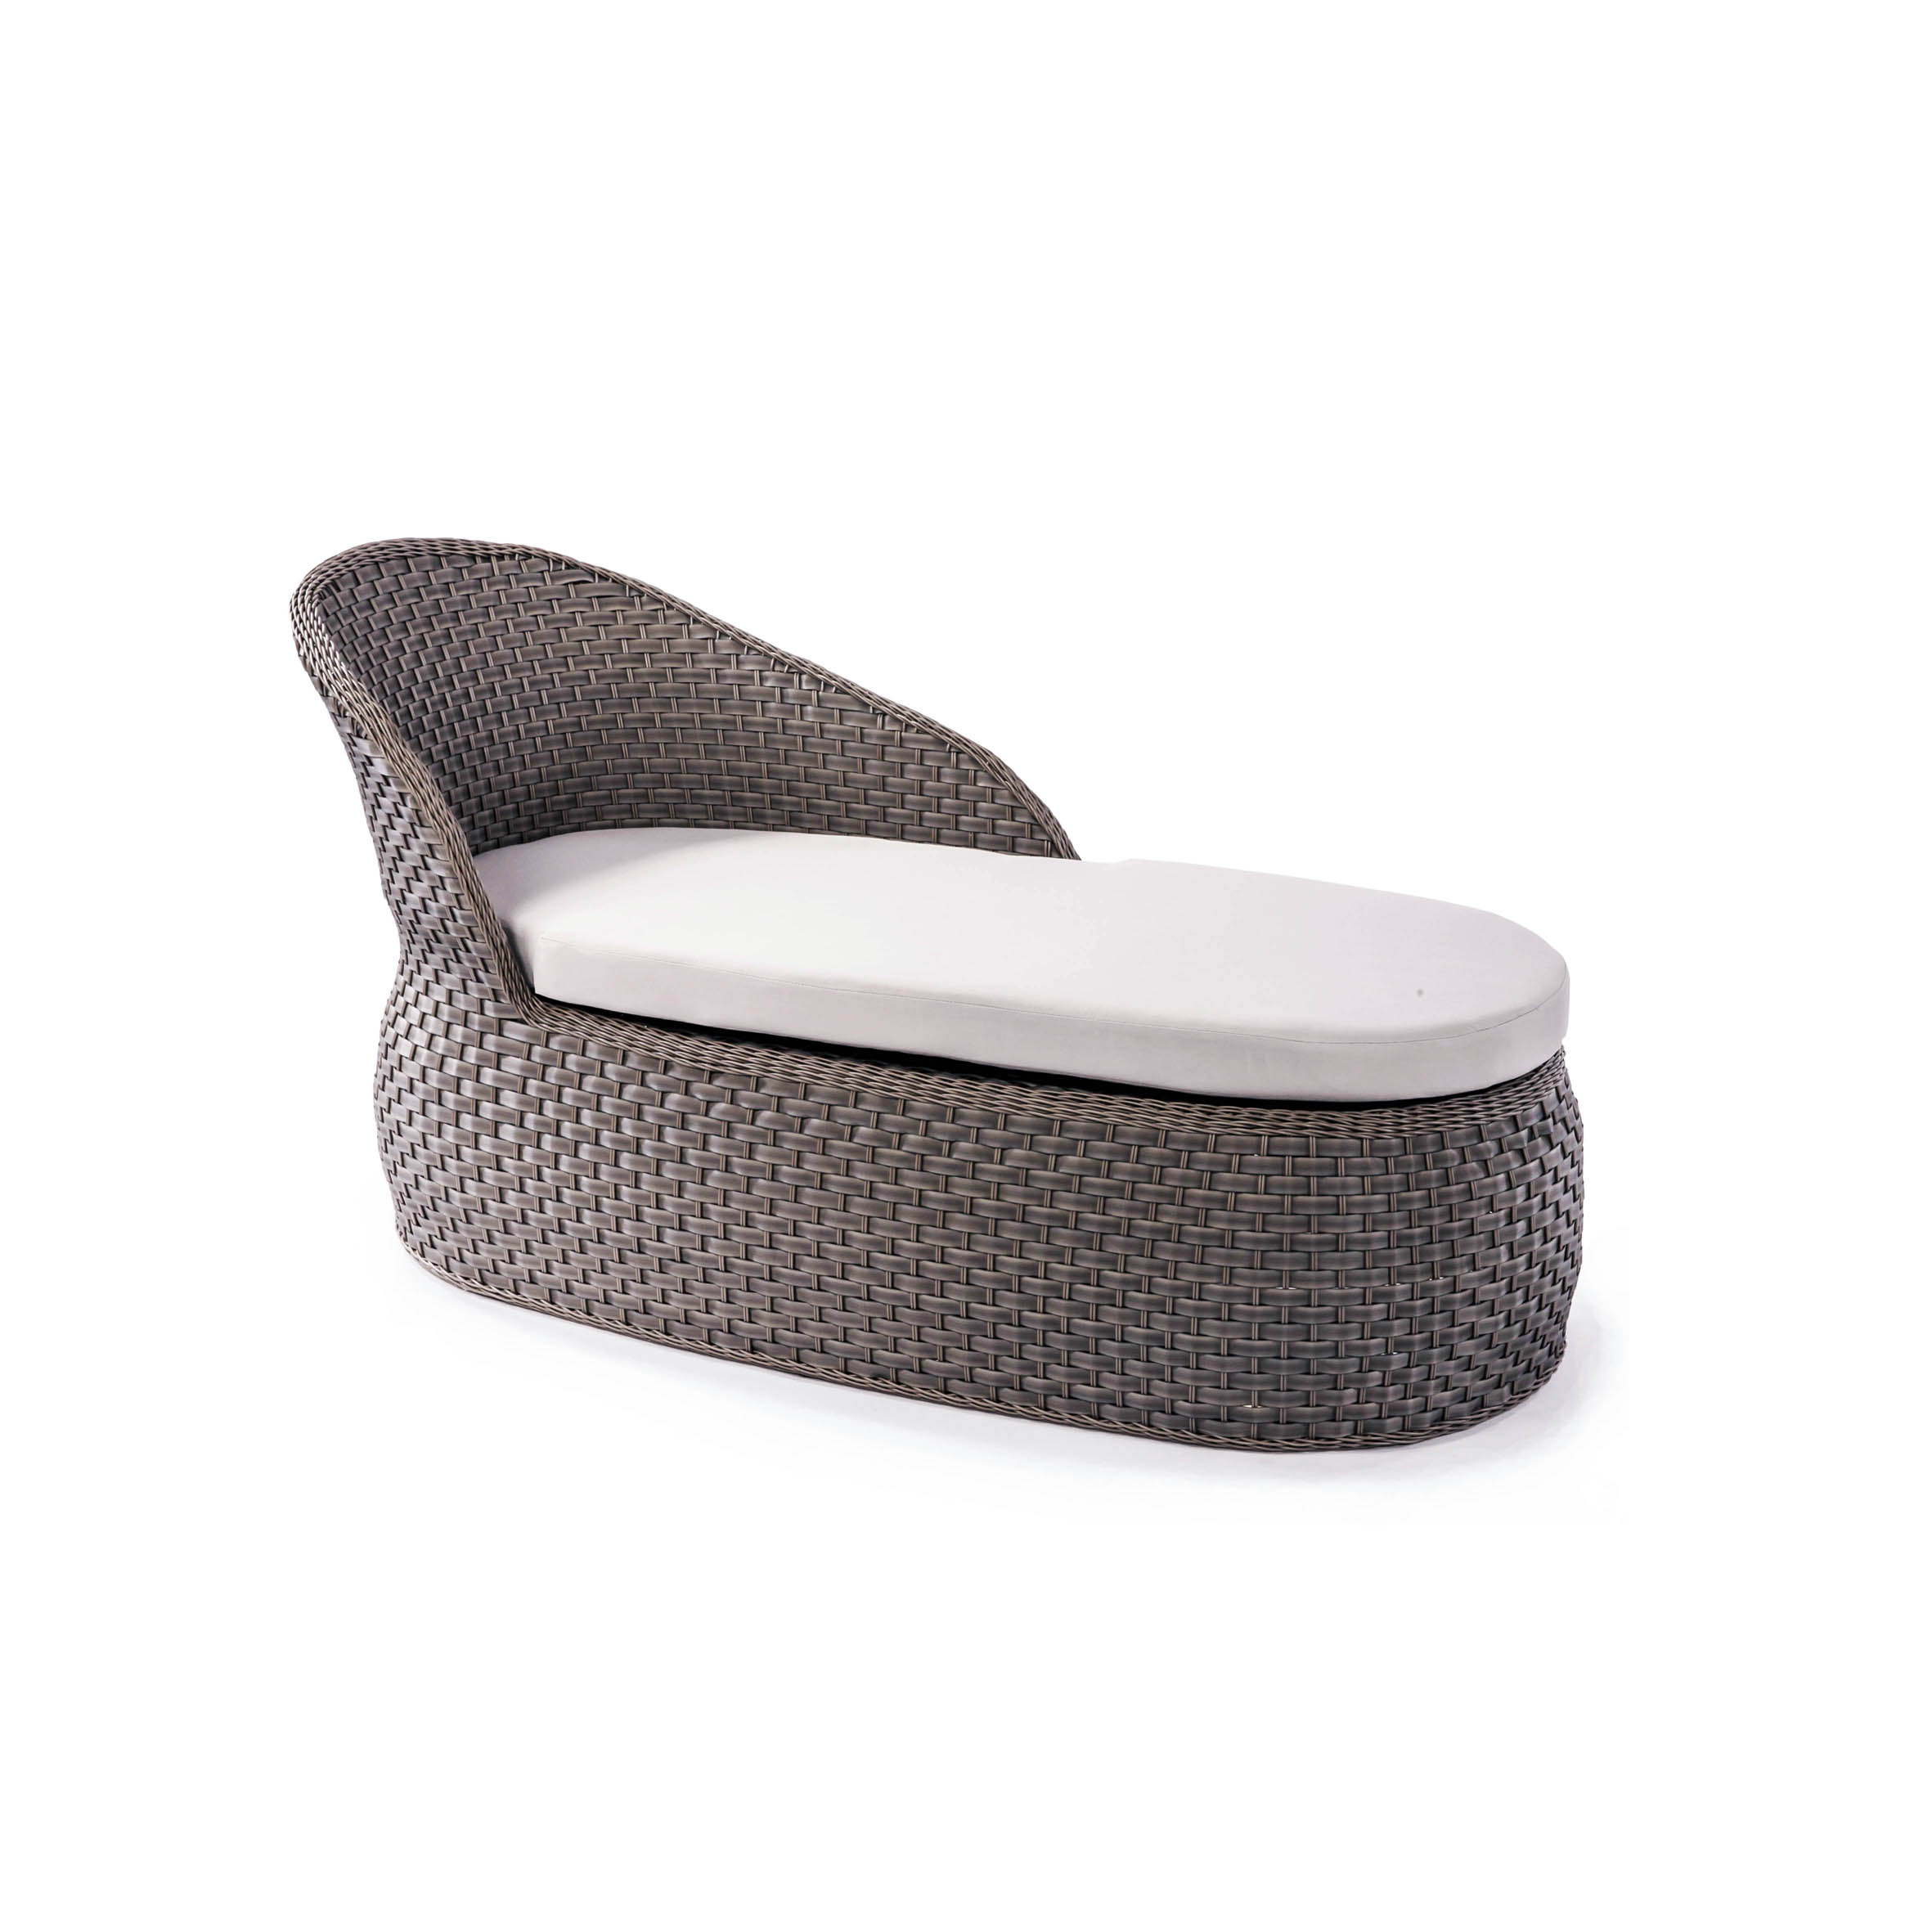 Swan rattan chaise lounge Featured Image